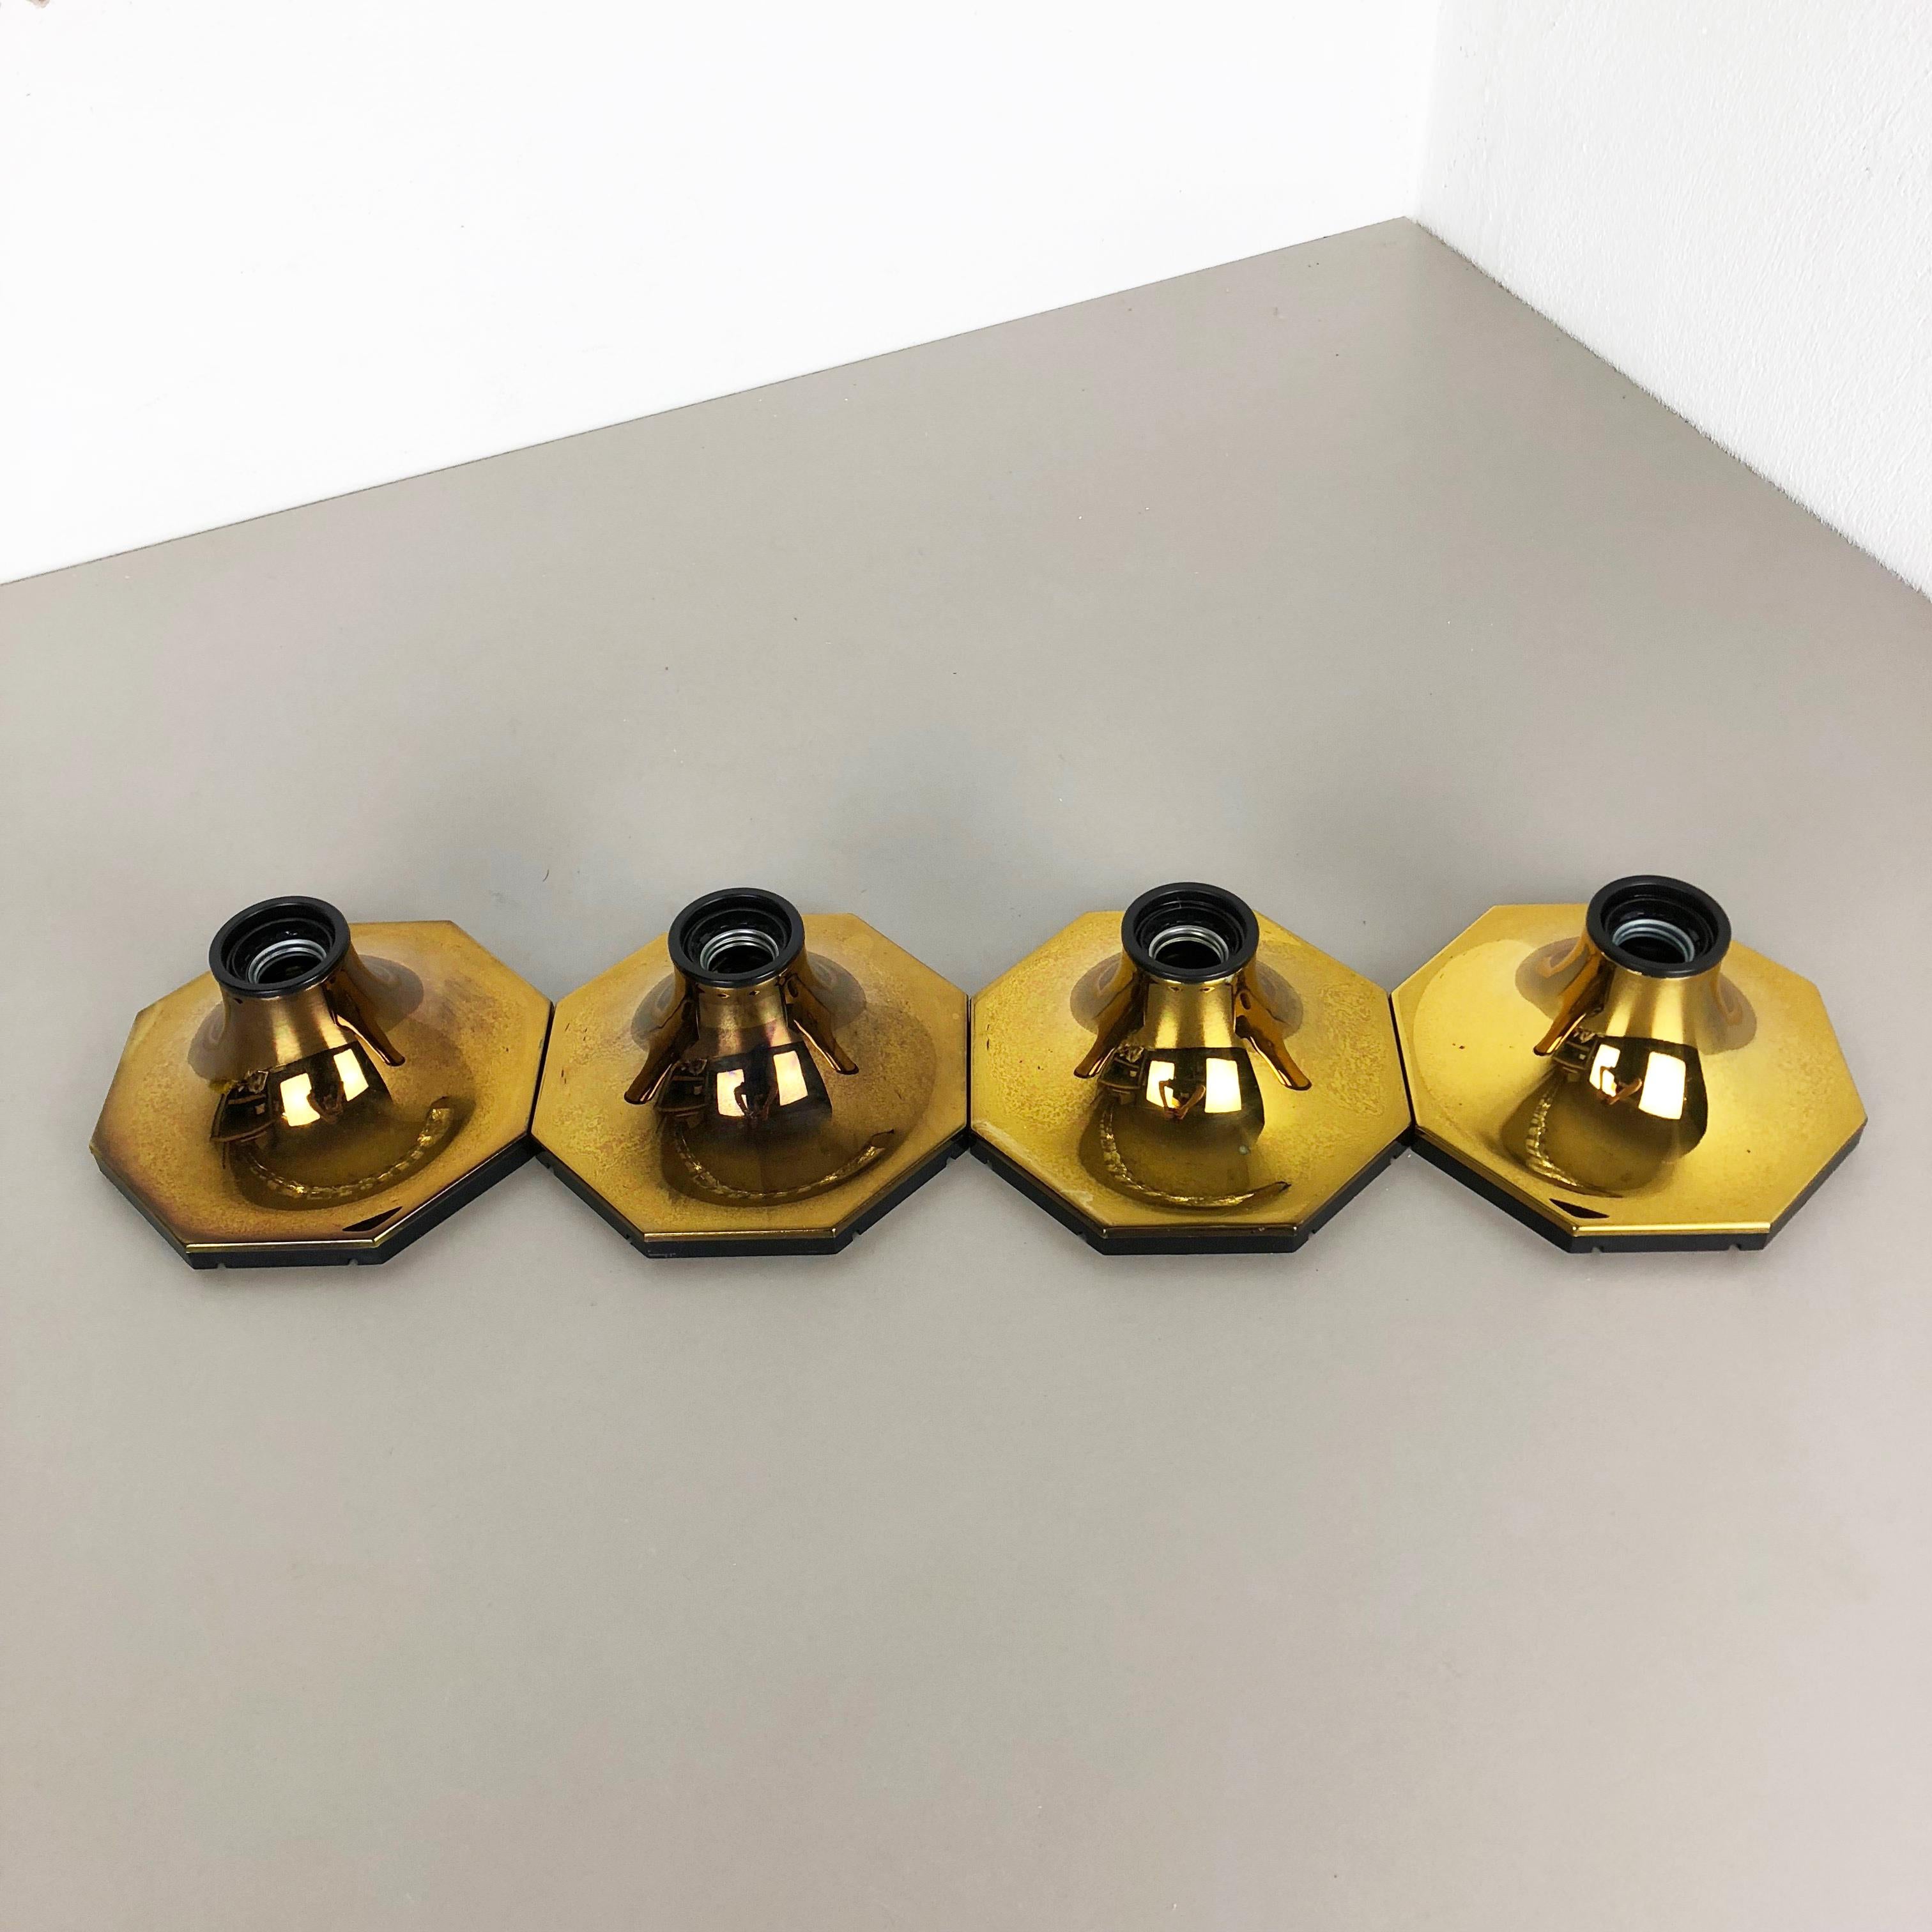 German Set of Four Golden Cubic Wall Lights by Motoko Ishii for Staff Lights, 1970